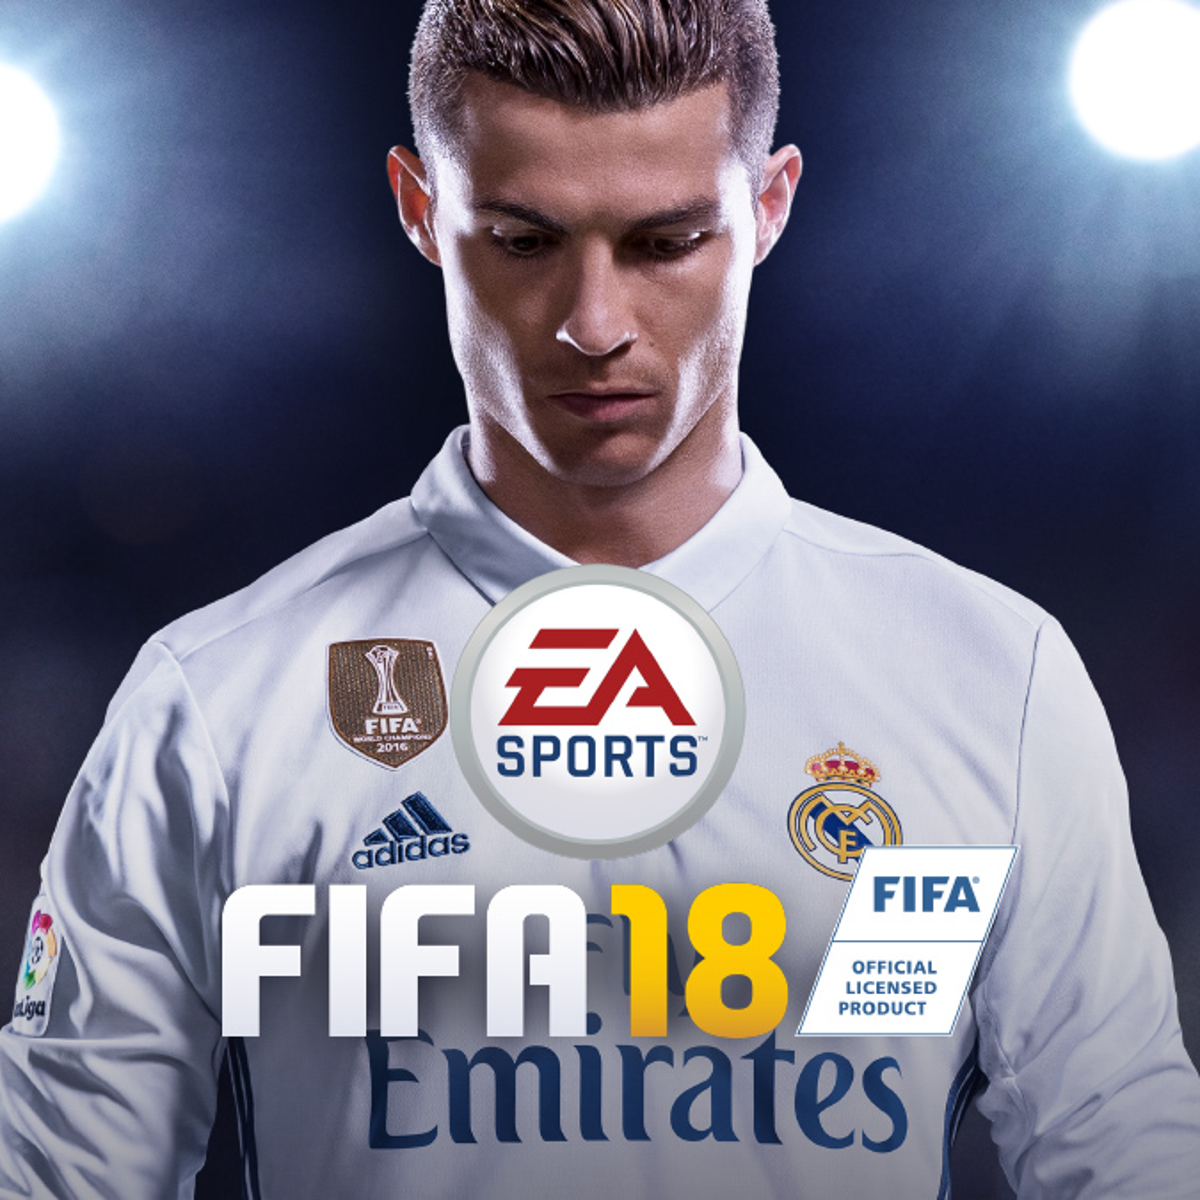 FIFA 18 cover star is Cristiano Ronaldo, Xbox-exclusive Legends replaced Icons on all platforms | VG247